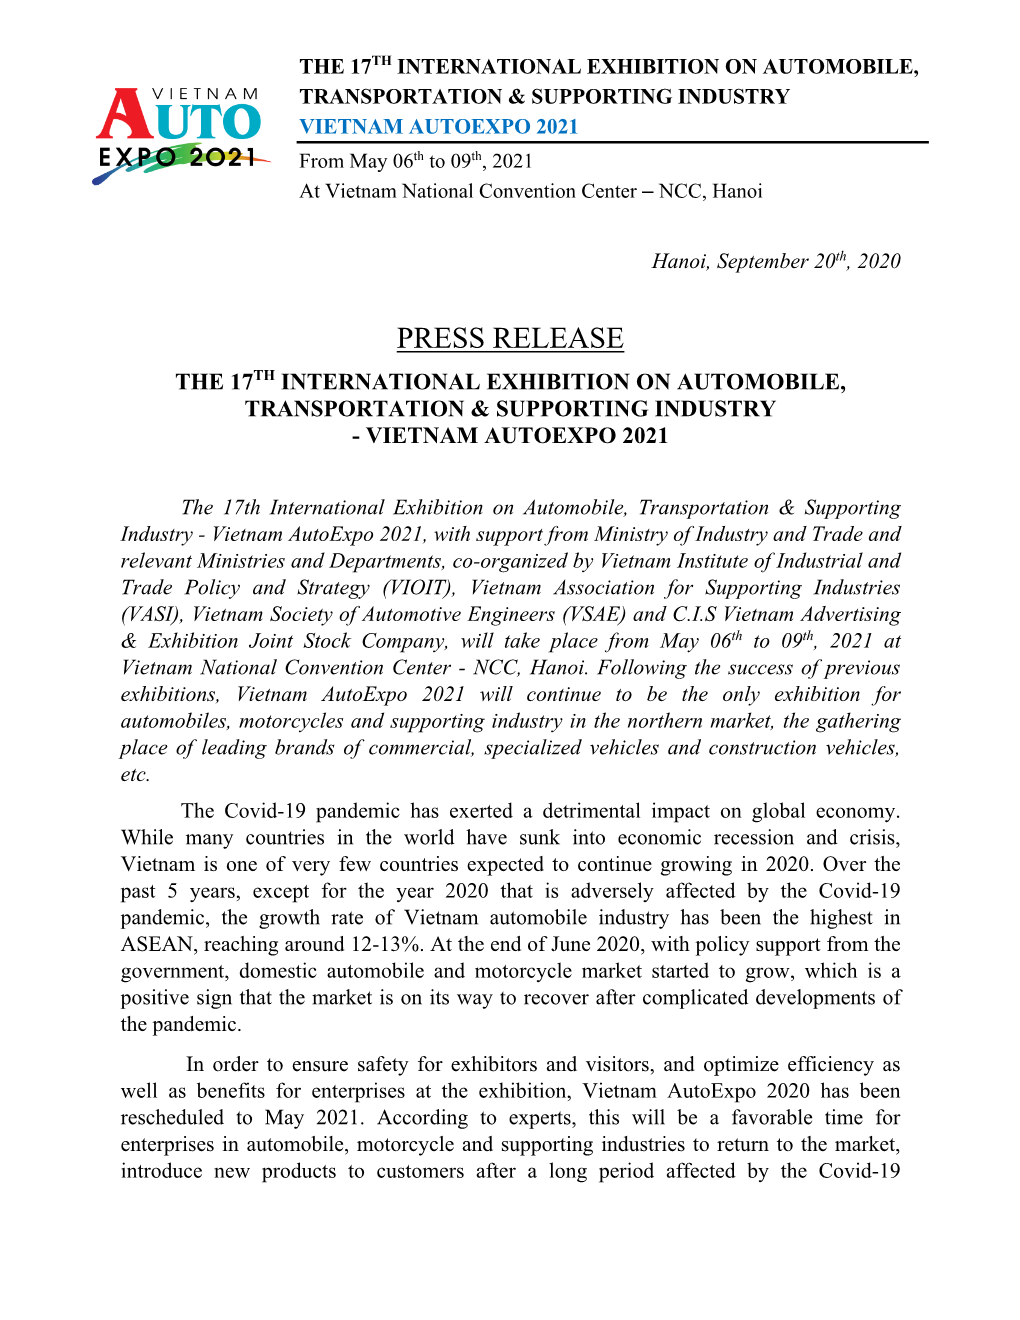 Press Release the 17Th International Exhibition on Automobile, Transportation & Supporting Industry - Vietnam Autoexpo 2021